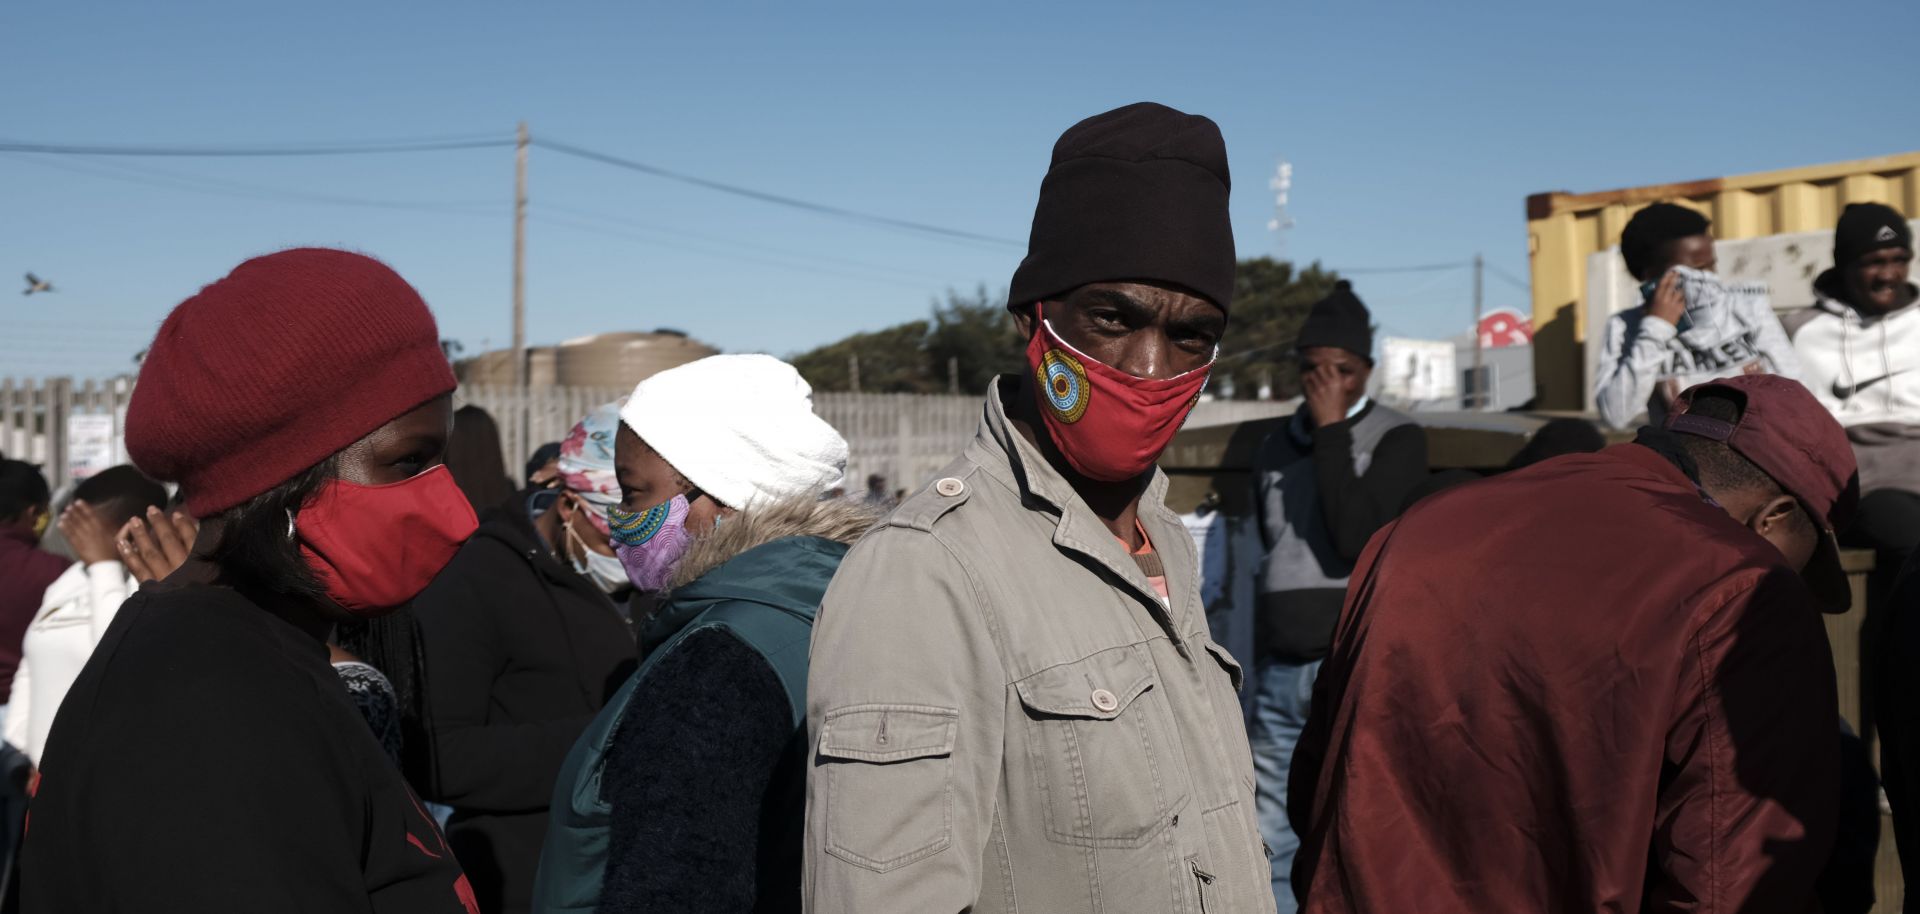 People stand in line to receive grant payments from the South African Social Security Agency (SASSA) in Khayelitsha, a township located near Cape Town, on May 4, 2020. 